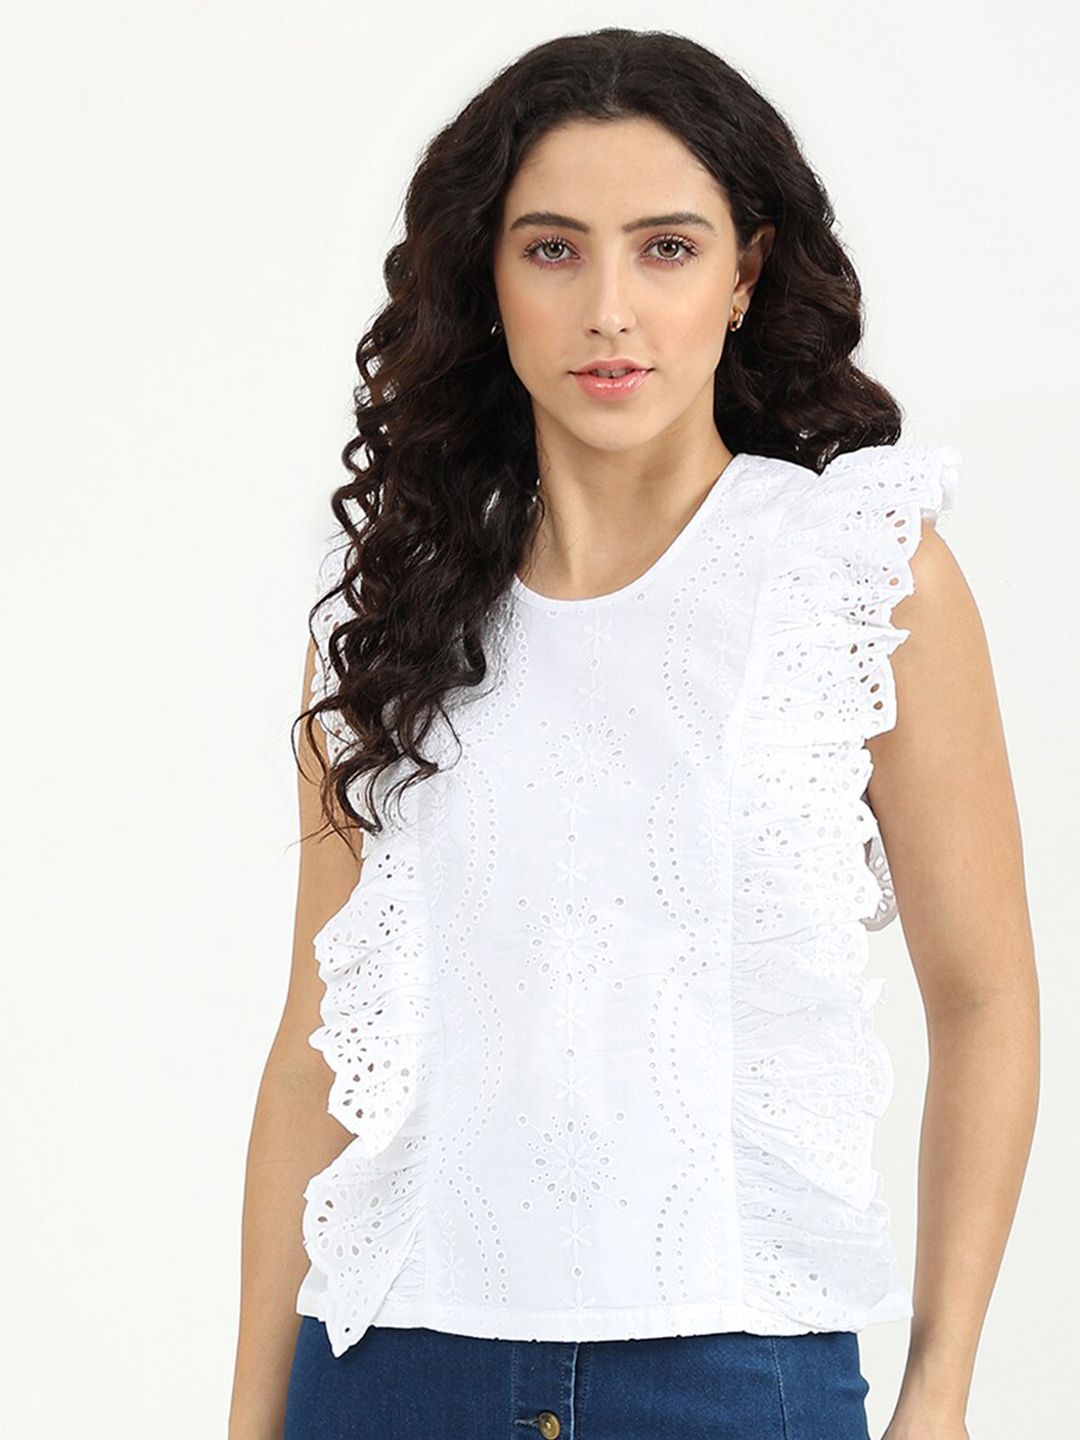 United Colors of Benetton White Solid Cotton Schiffli Top Price in India